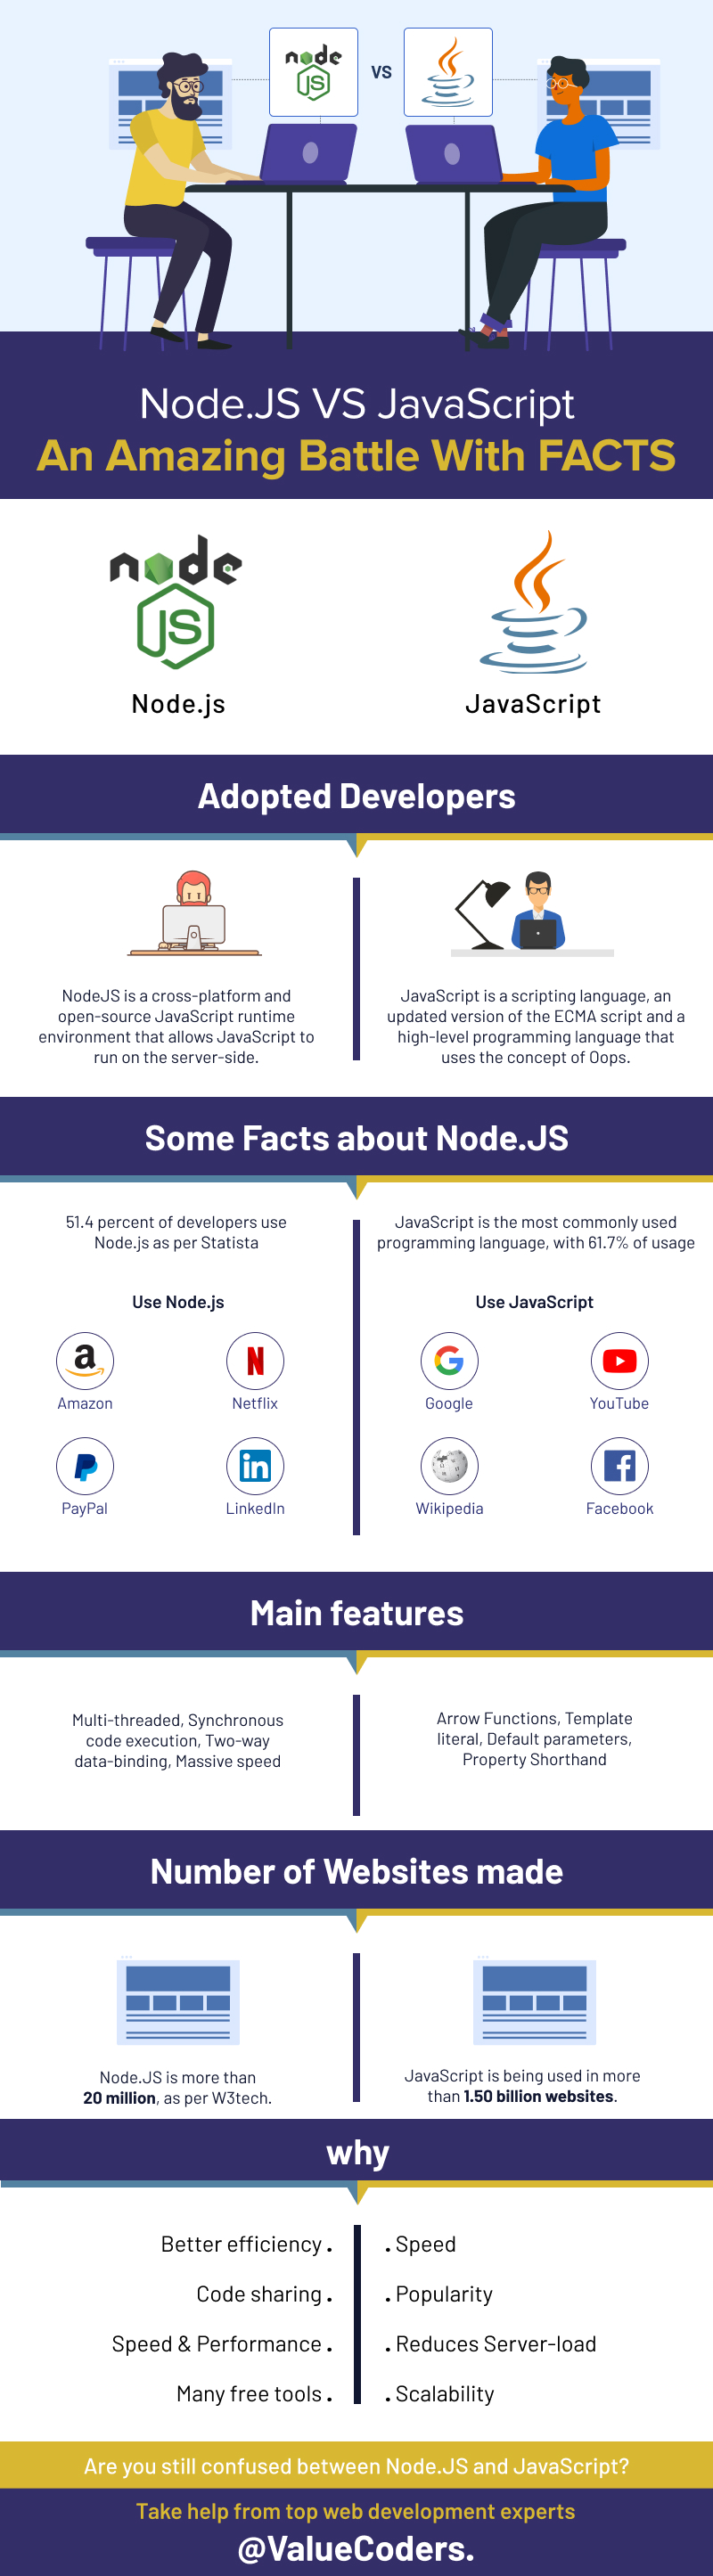 Node.JS VS JavaScript: An Amazing Battle with FACTS [Infographic]